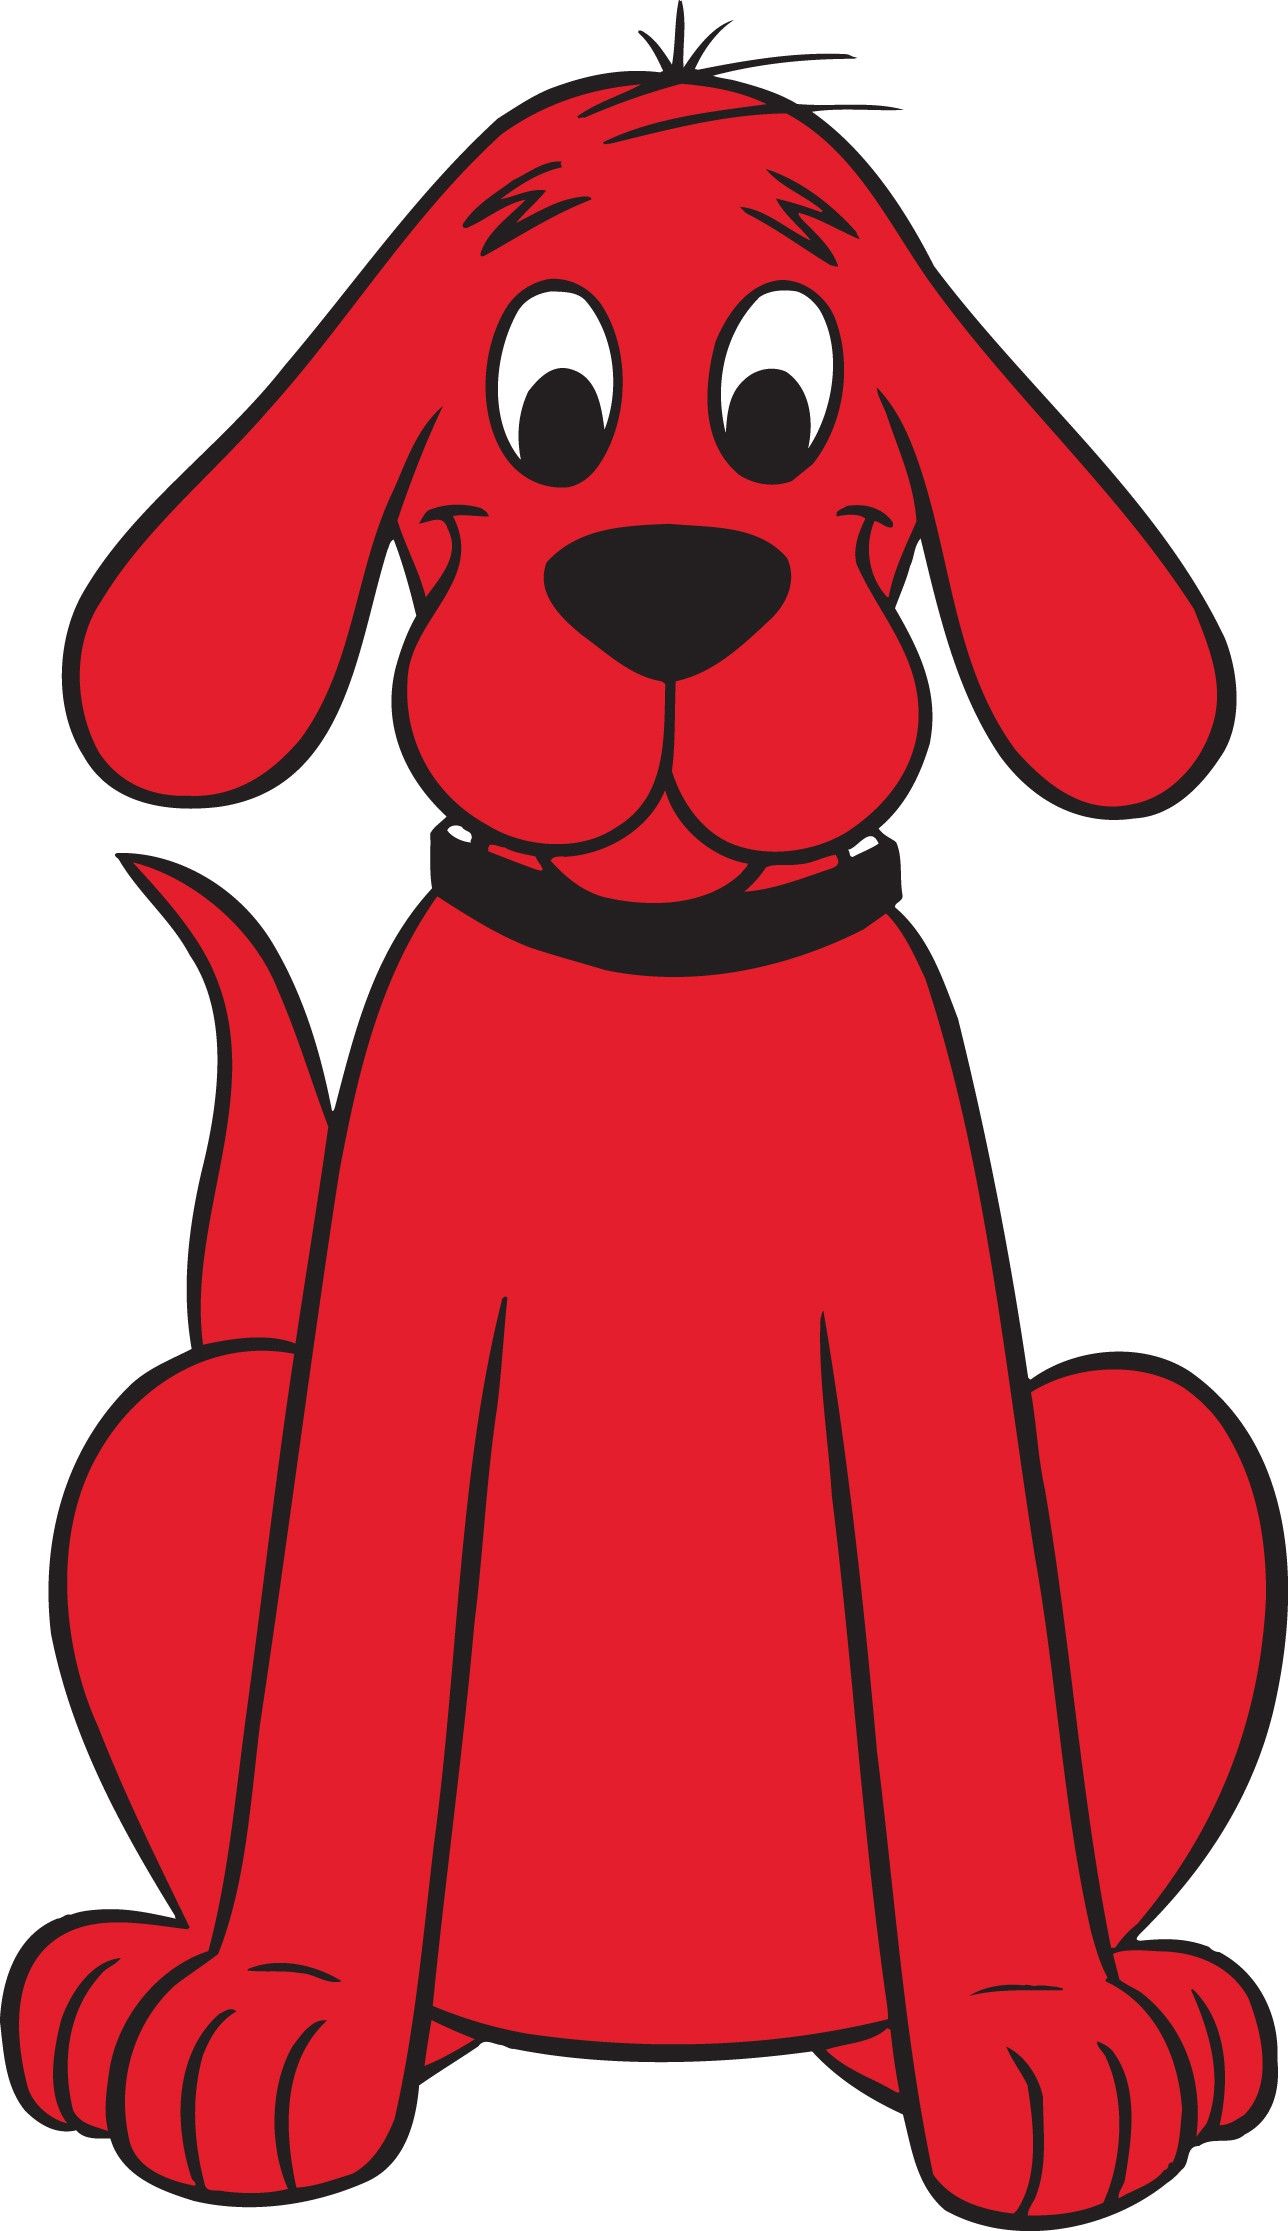 Clifford The Big Red Dog. Red dog, Children's book characters